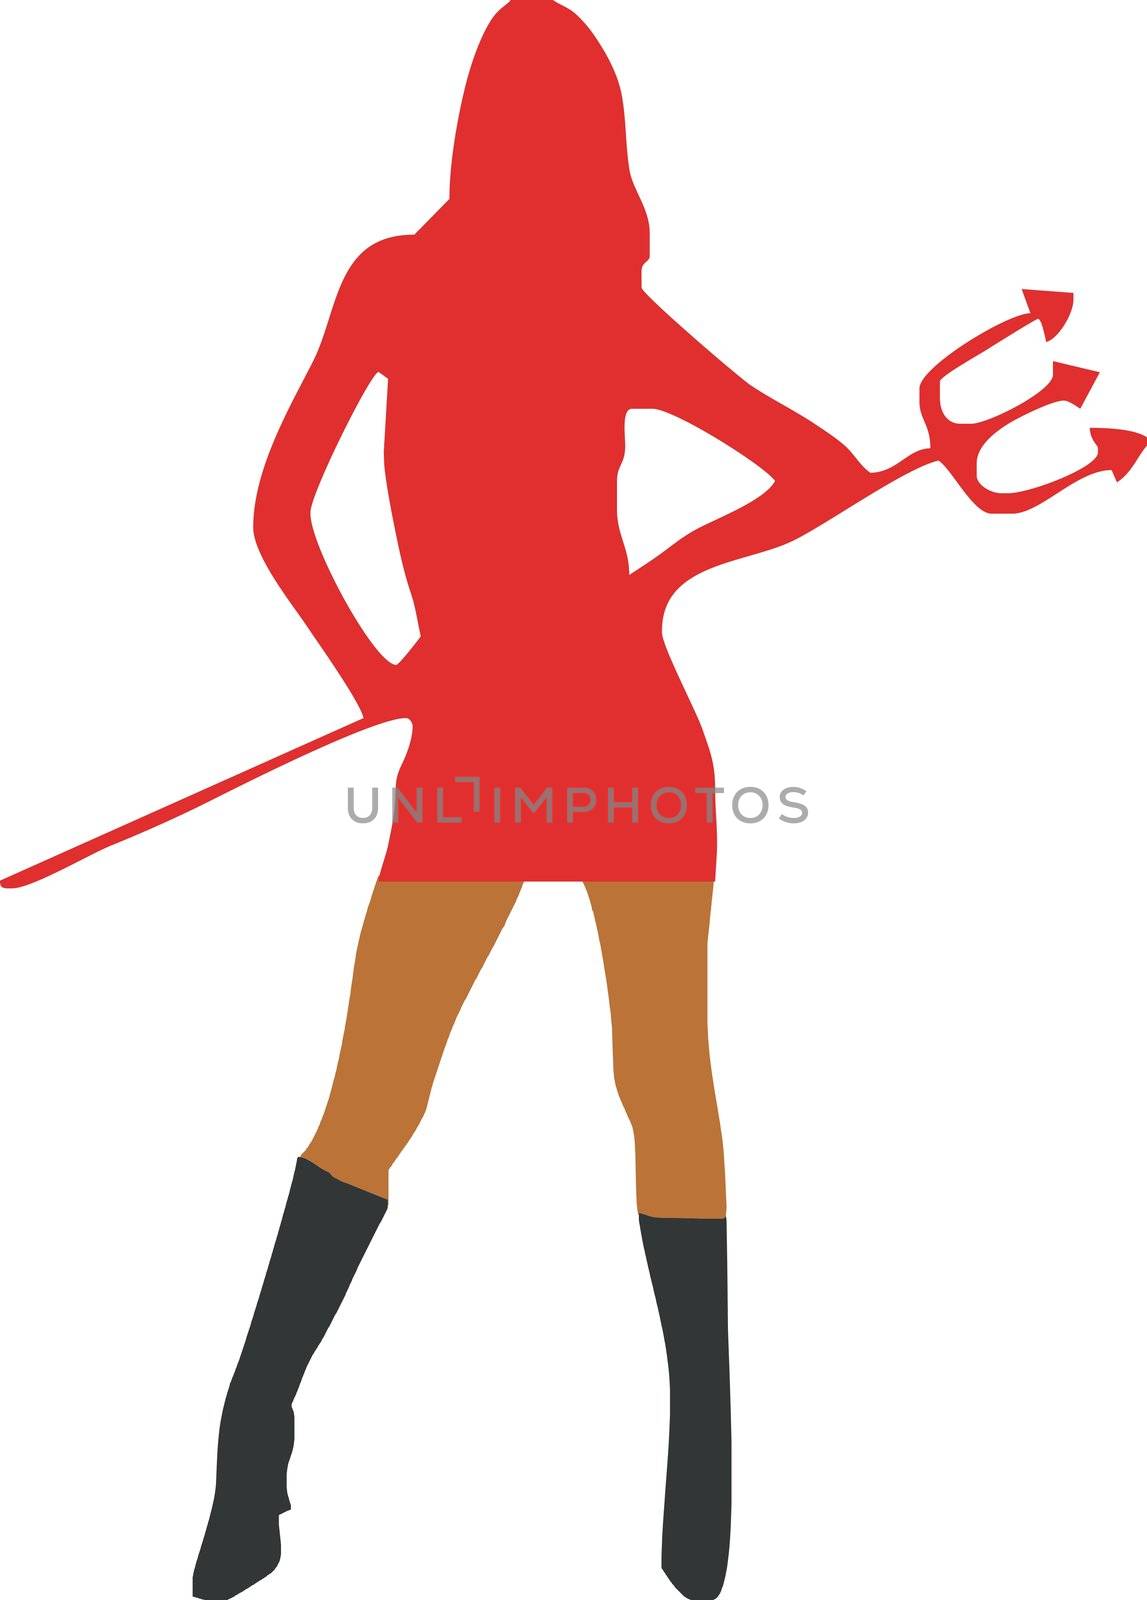 Sexy she-devil with trident - isolated vector illustration